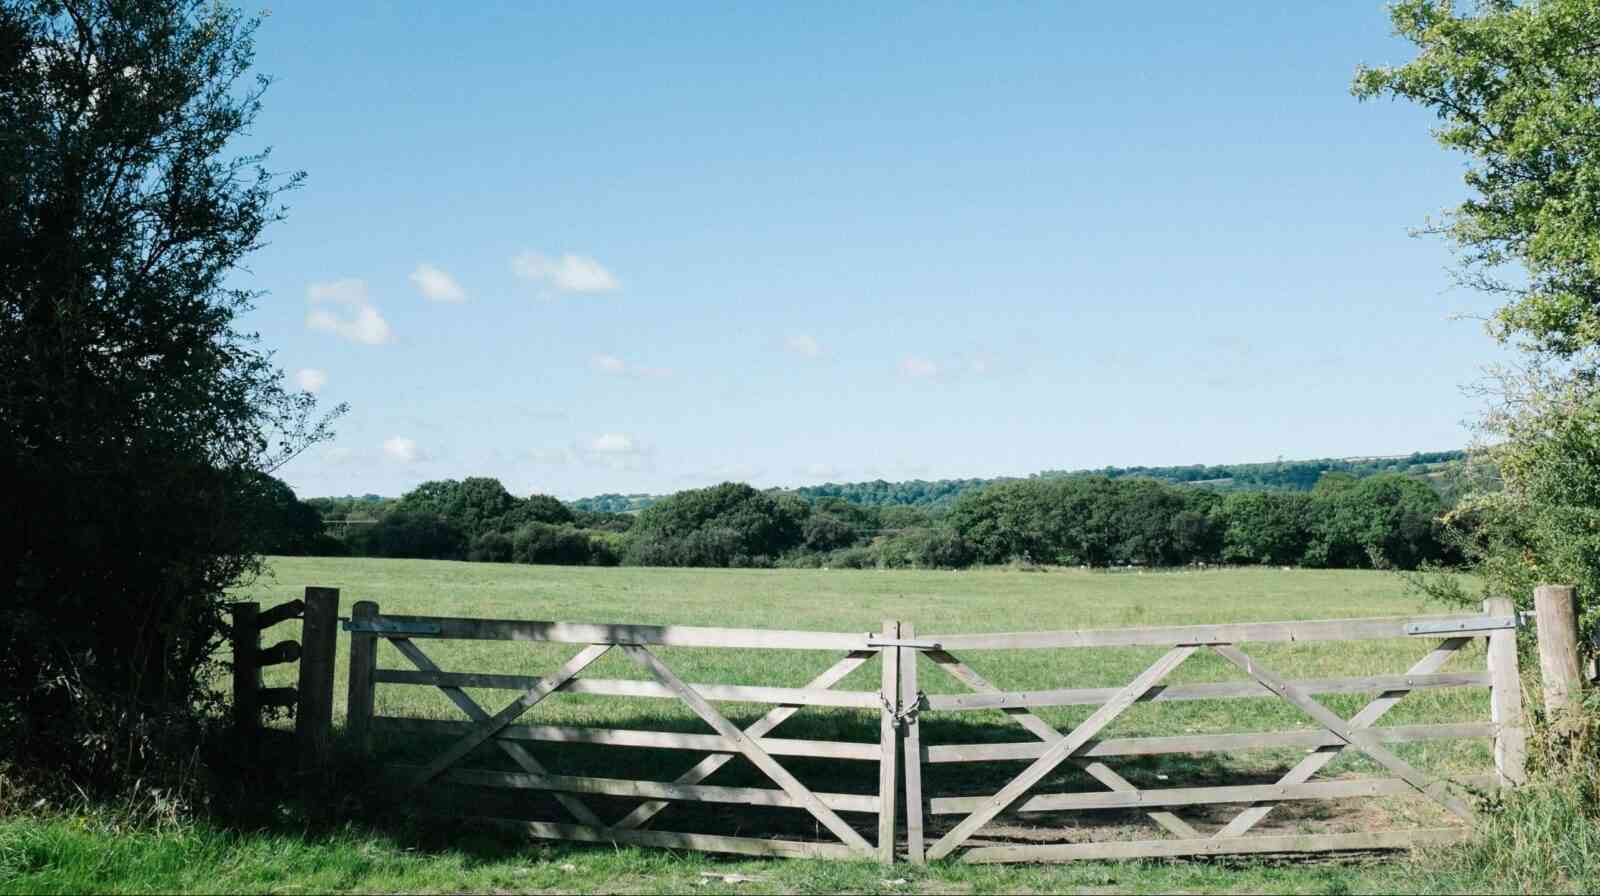 Mental health boundaries represented by a fence in the countryside.